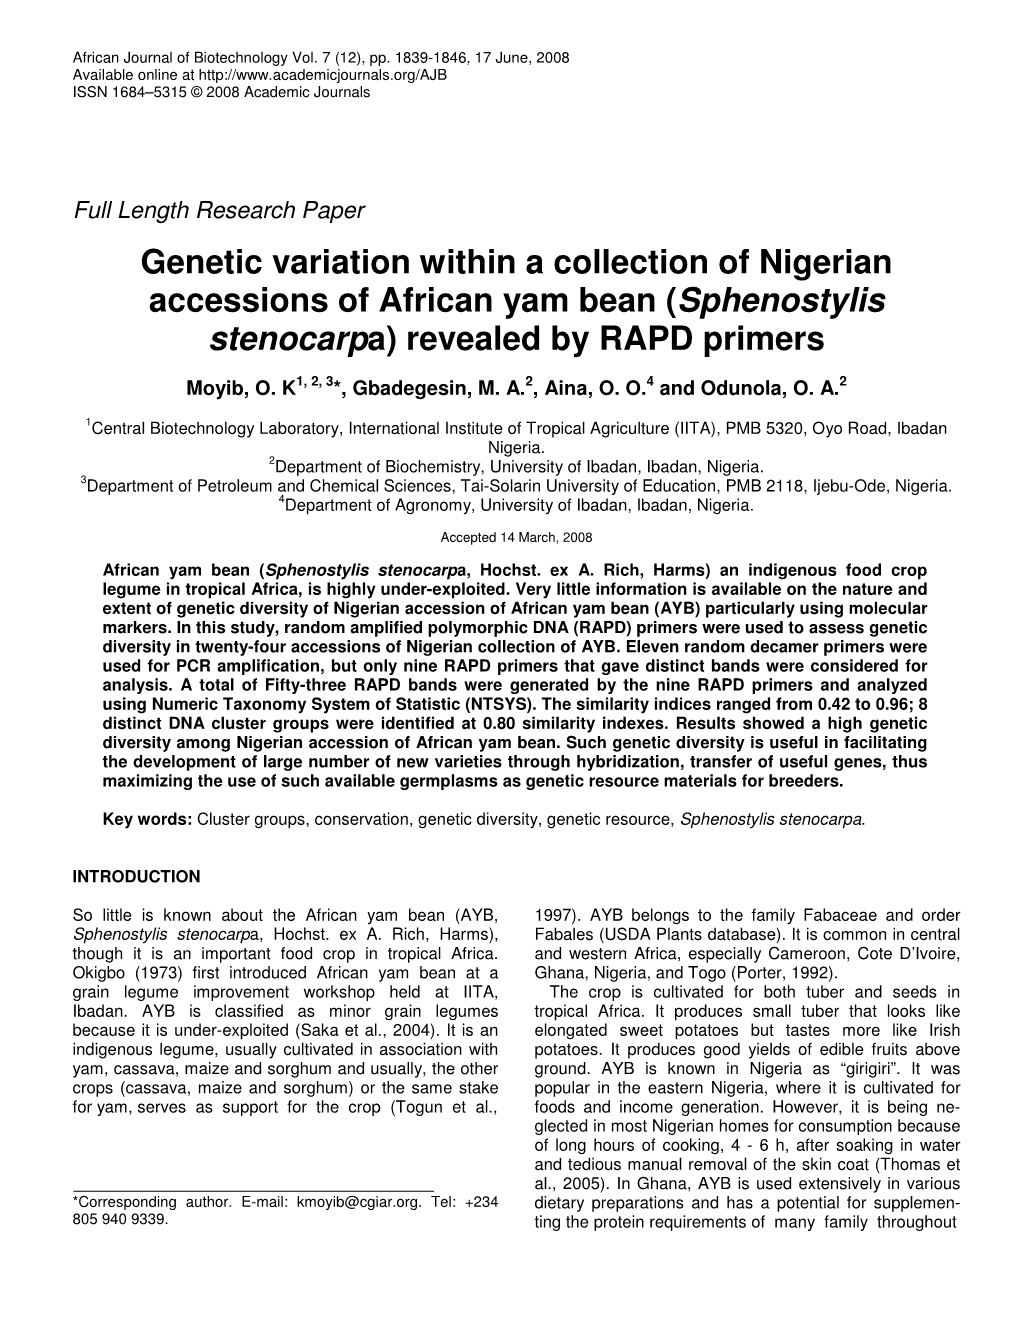 Genetic Variation Within a Collection of Nigerian Accessions of African Yam Bean (Sphenostylis Stenocarpa) Revealed by RAPD Primers